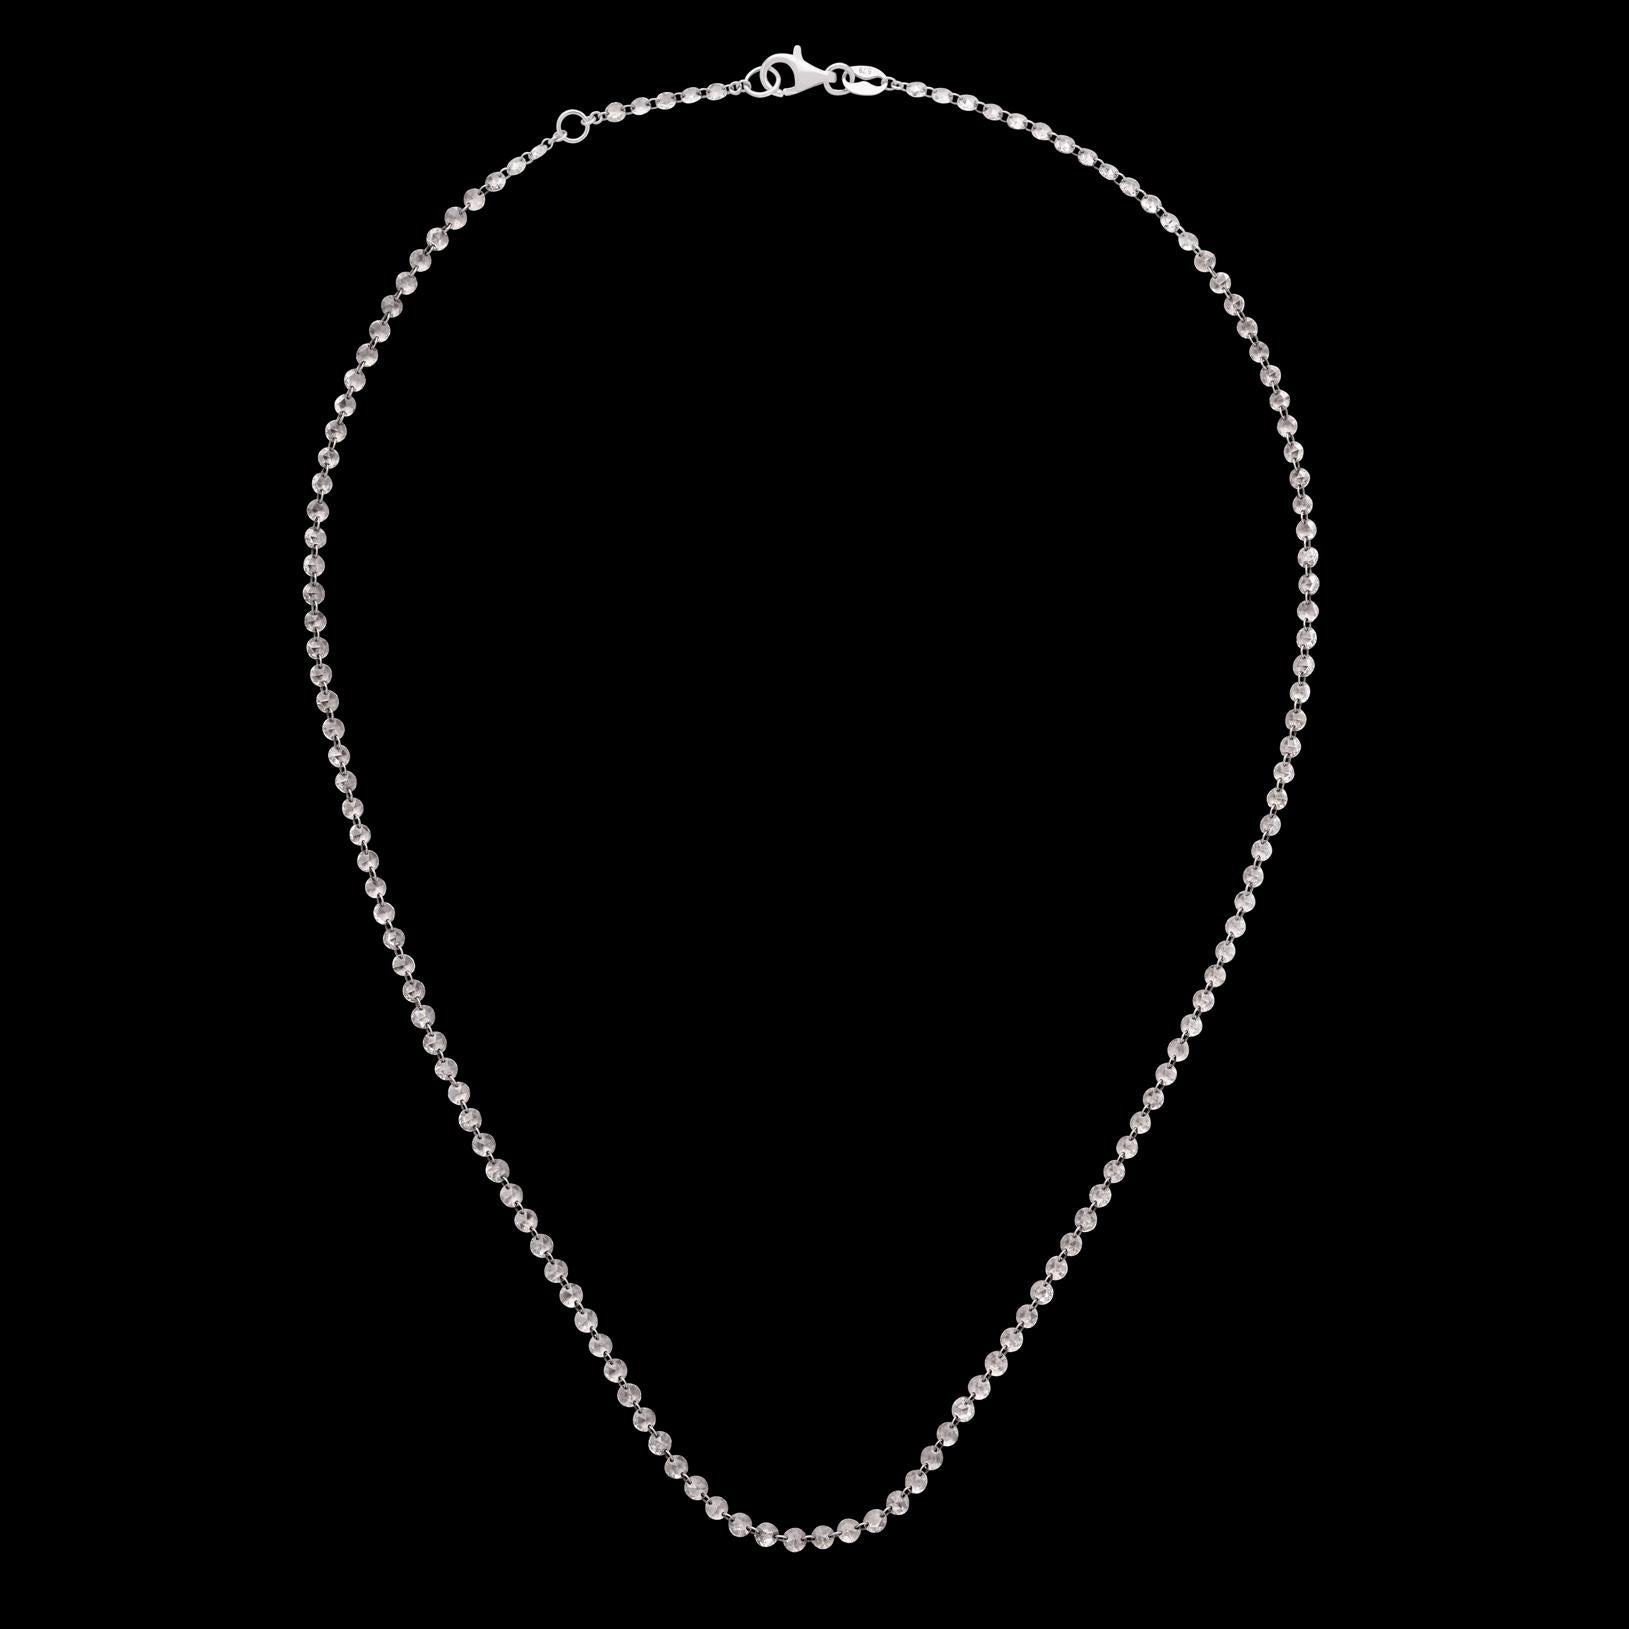 Round Cut 18kt White Gold 5.79 Carat Diamond Necklace For Sale